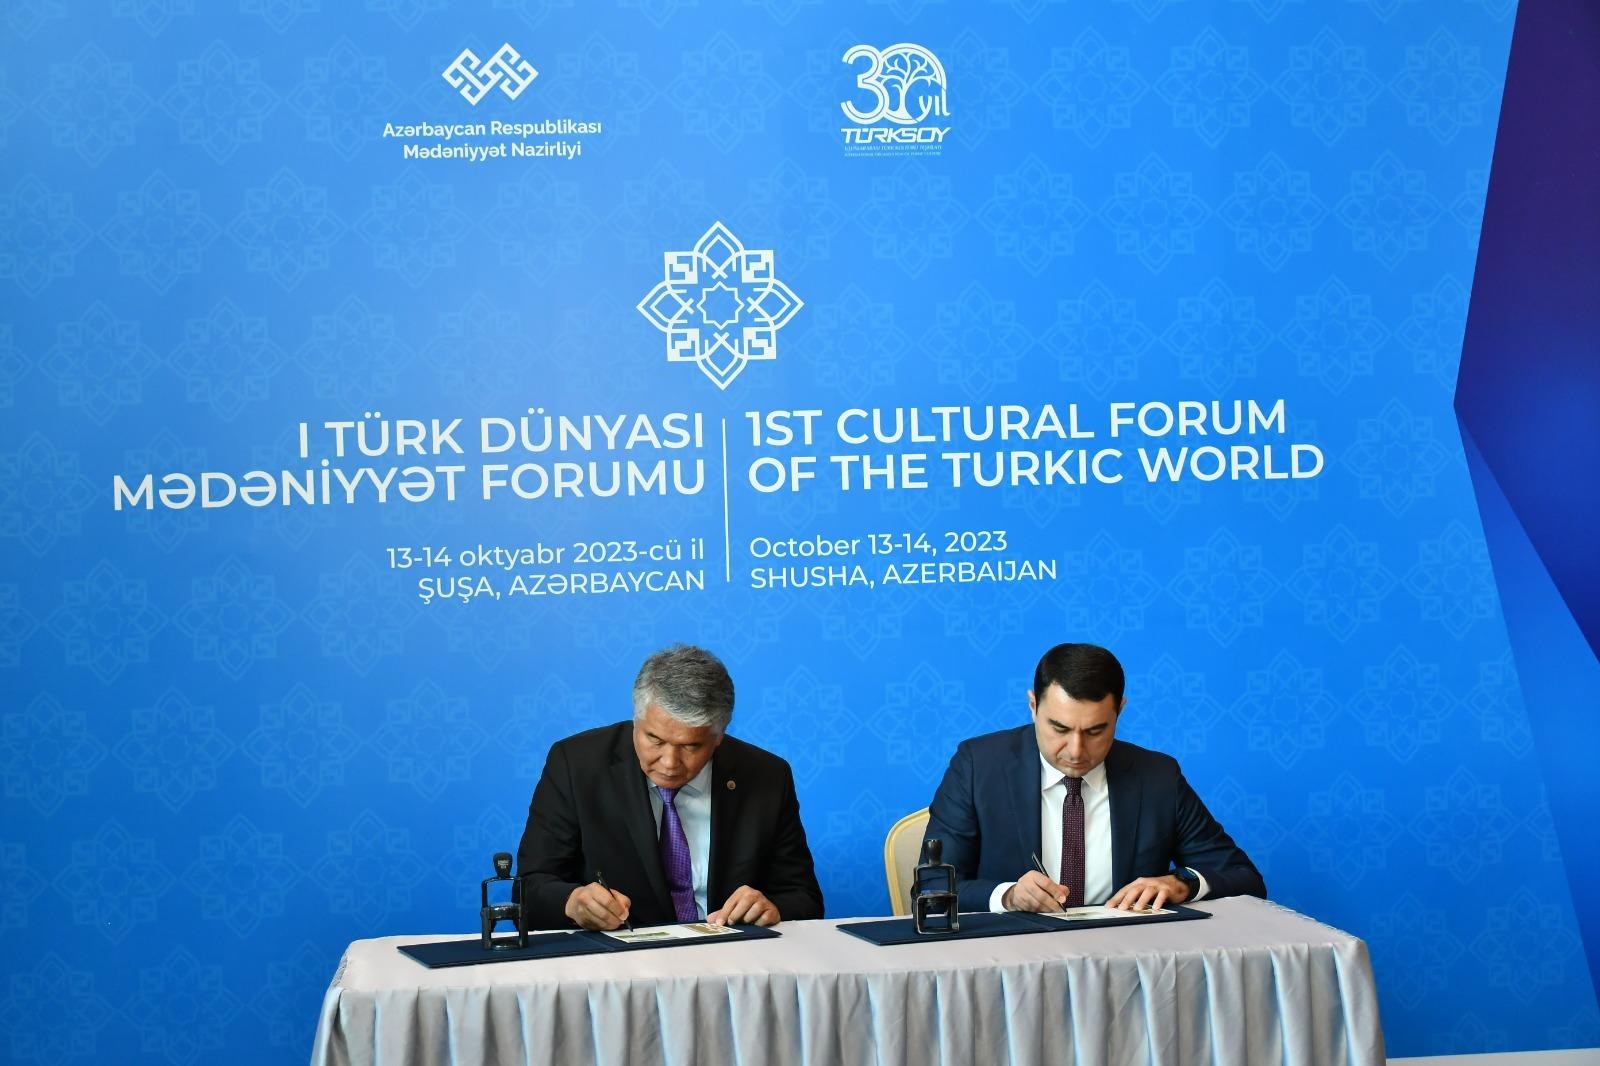 Shusha's declaration as the cultural capital of the Turkic world has led to the creation of a postage stamp.